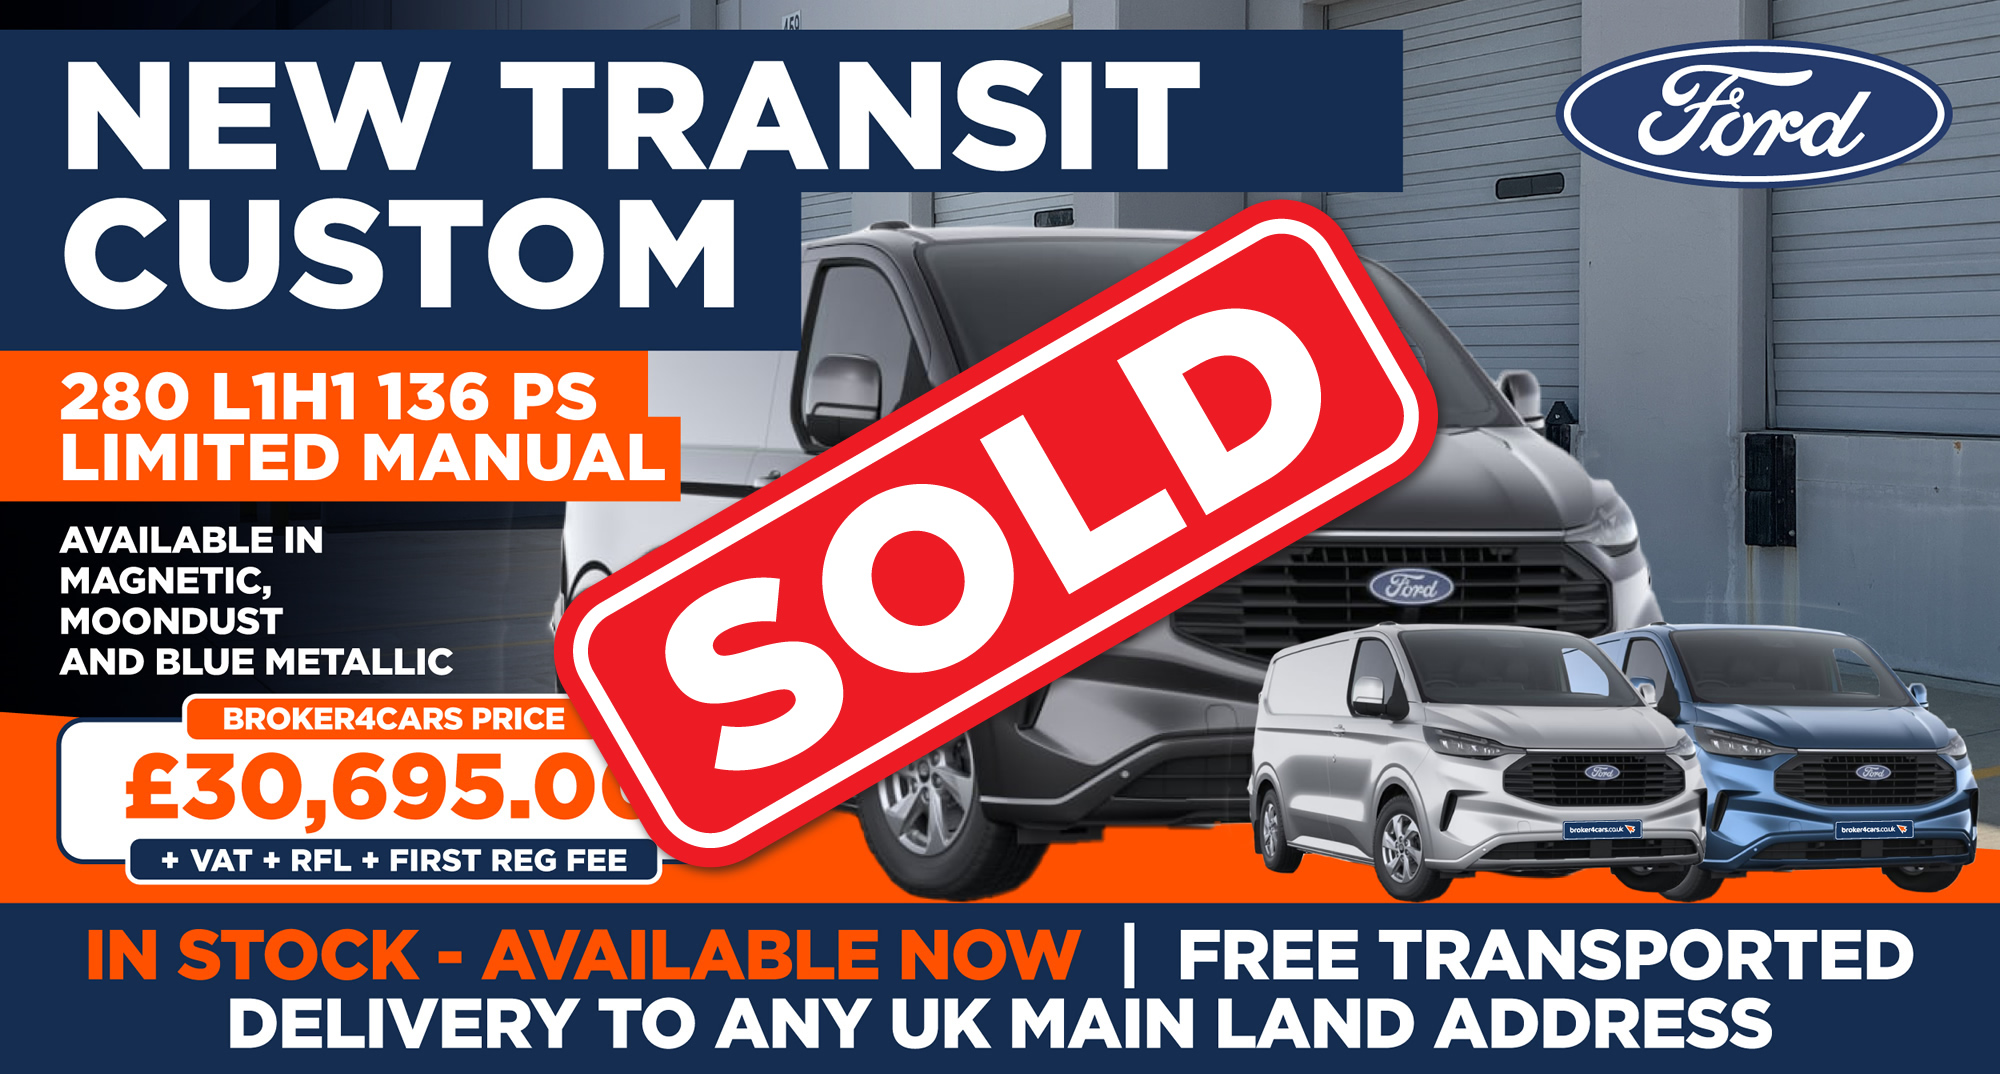 New Transit Custom 280 L1H1 136 PS Limited ManualAvailable in Magnetic, Moondust and Blue Metallic, In stock - Available now, Free Transported Delivery to any UK Mainland Address